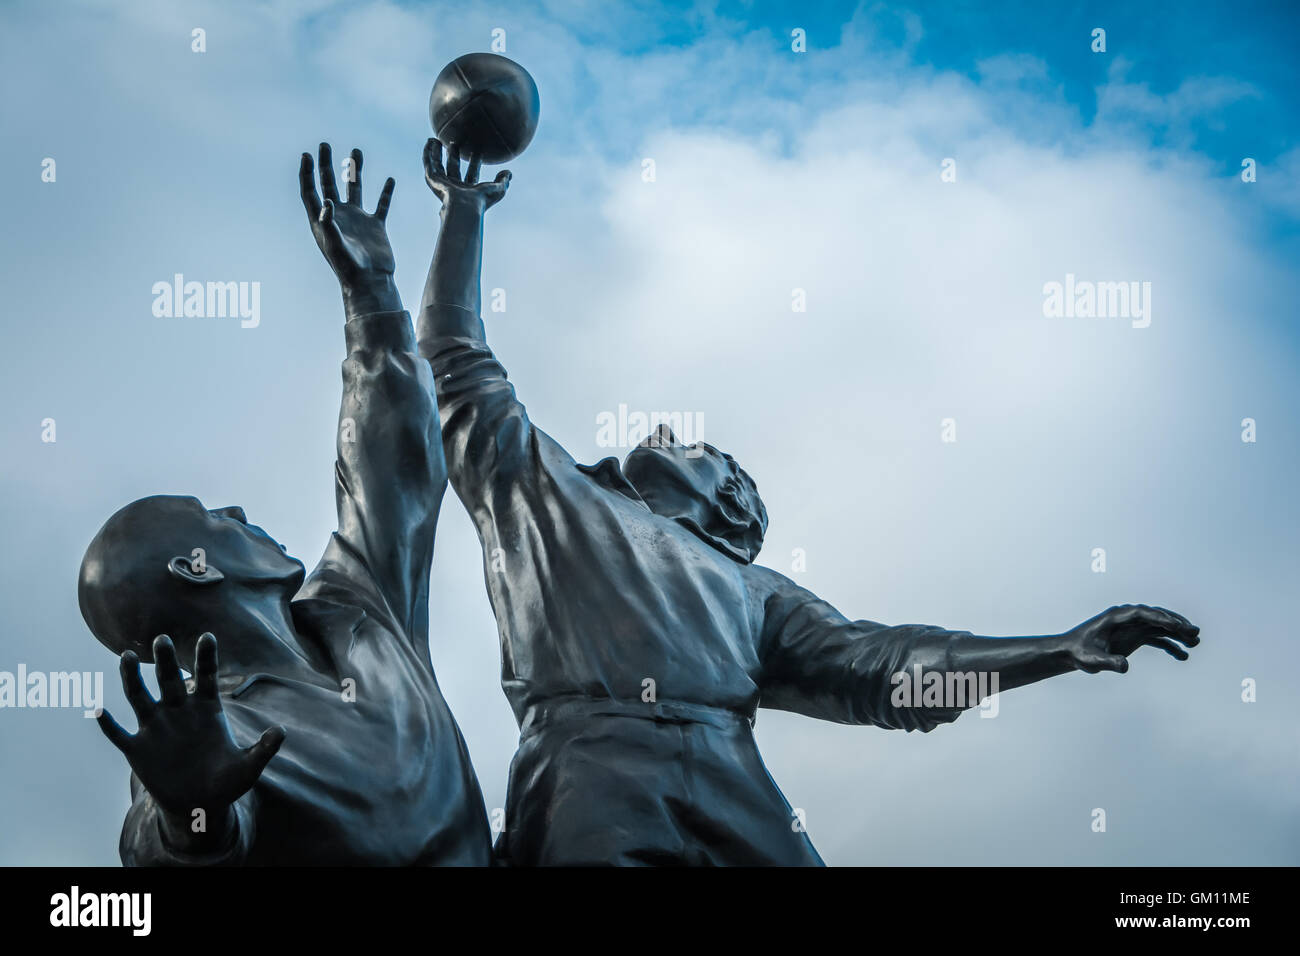 Iconic bronze of rugby line-out by sculptor Gerald Laing outside Twickenham Stadium, London, UK. Stock Photo